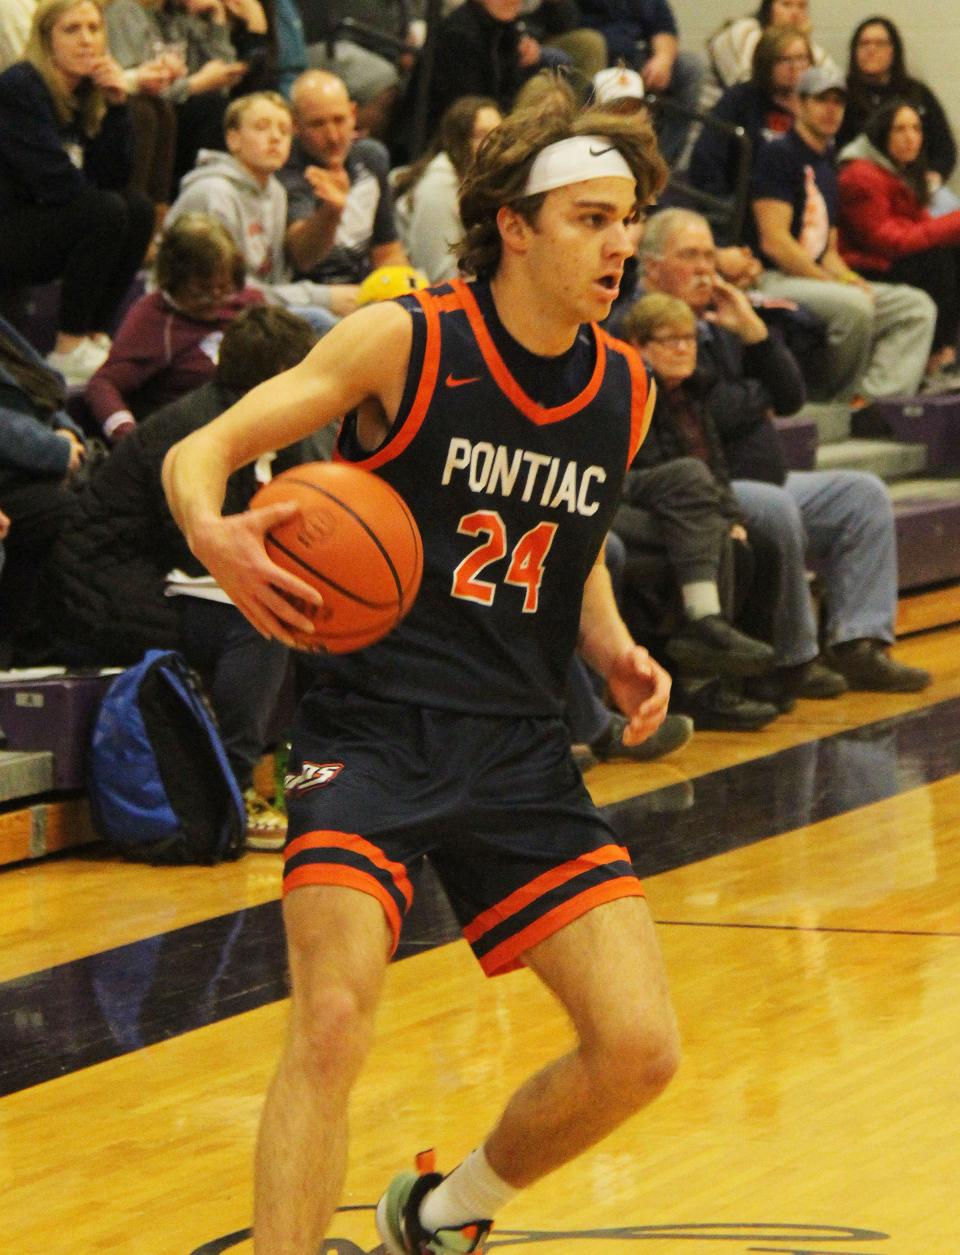 Pontiac's Kerr Bauman pulls up and surveys the situation during the first half of the Indians' game with New Berlin Saturday. Bauman hit a game-winning 3-pointer at the buzzer to lift the Tribe to a 43-40 victory.